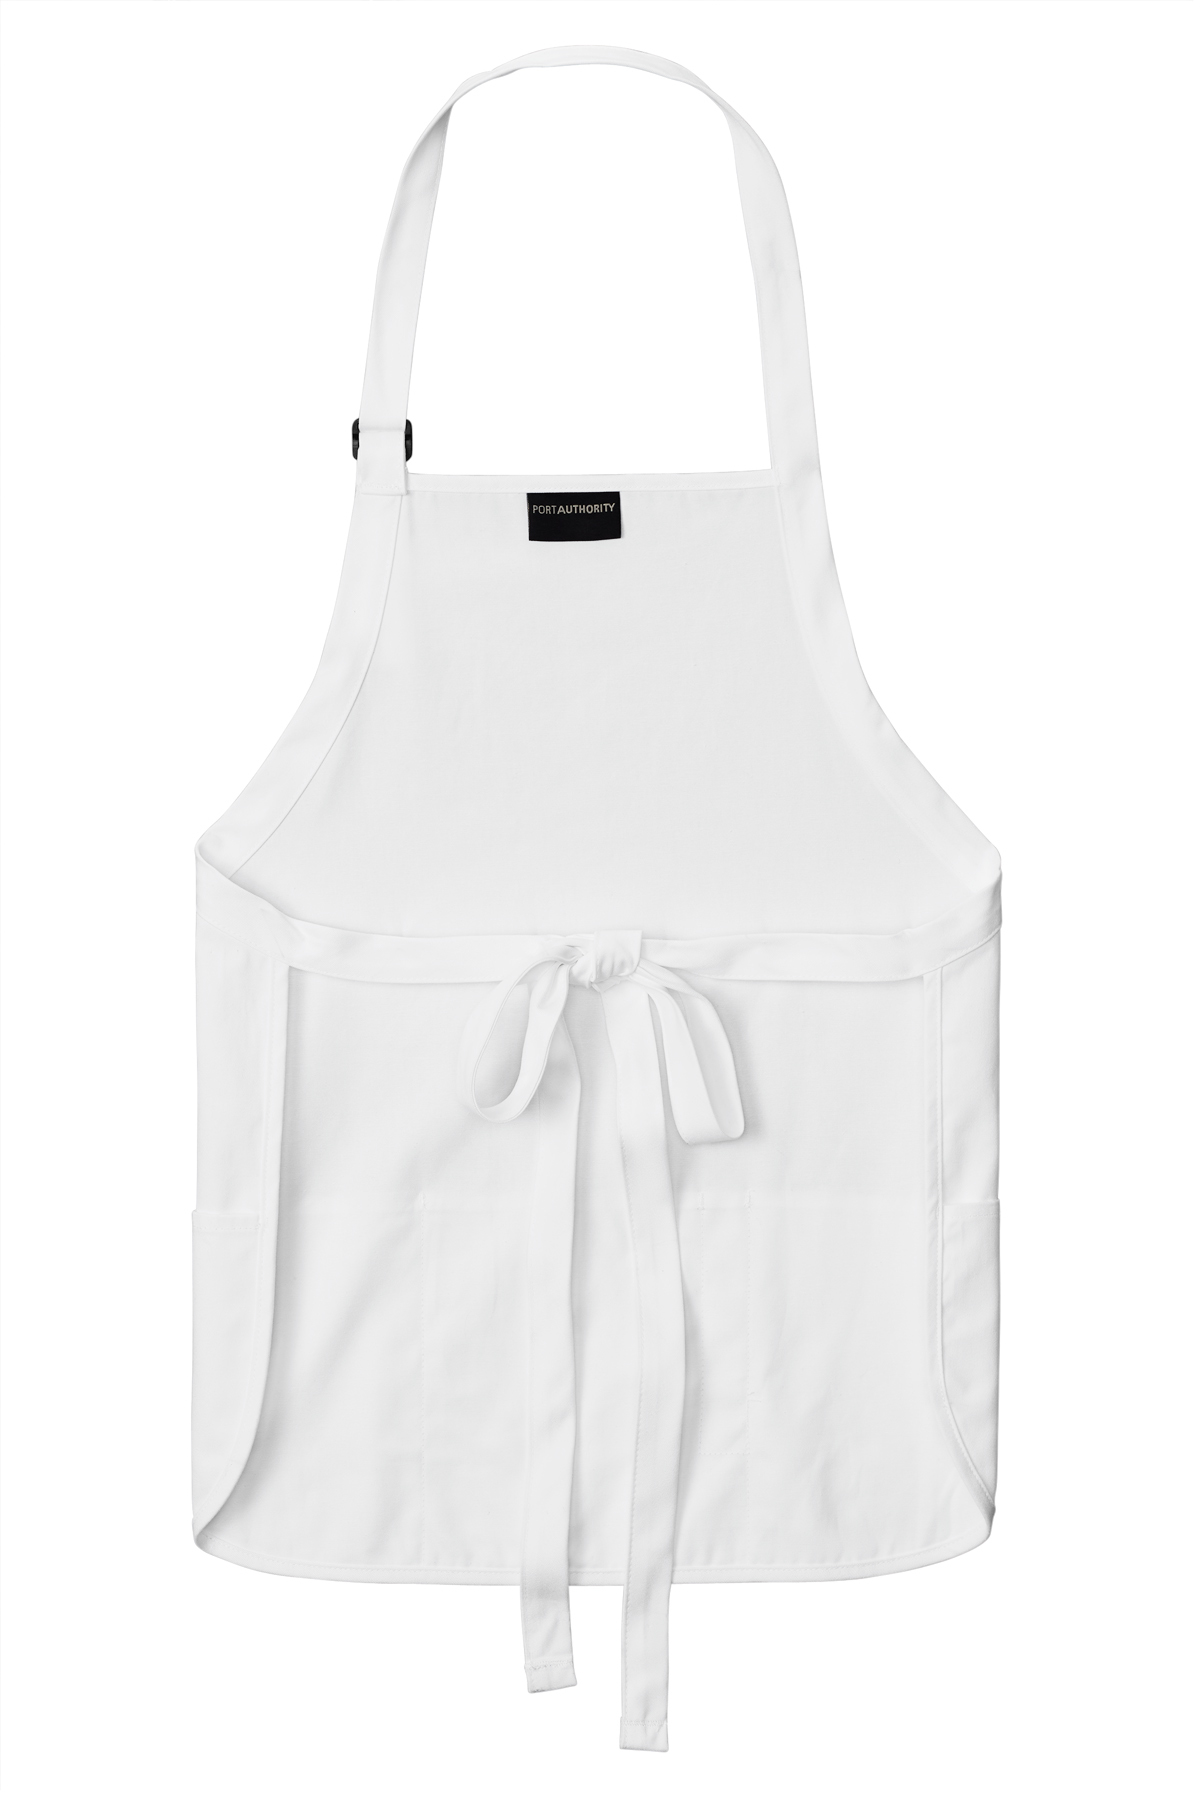 Port Authority Medium-Length Apron with Pouch Pockets | Product | SanMar